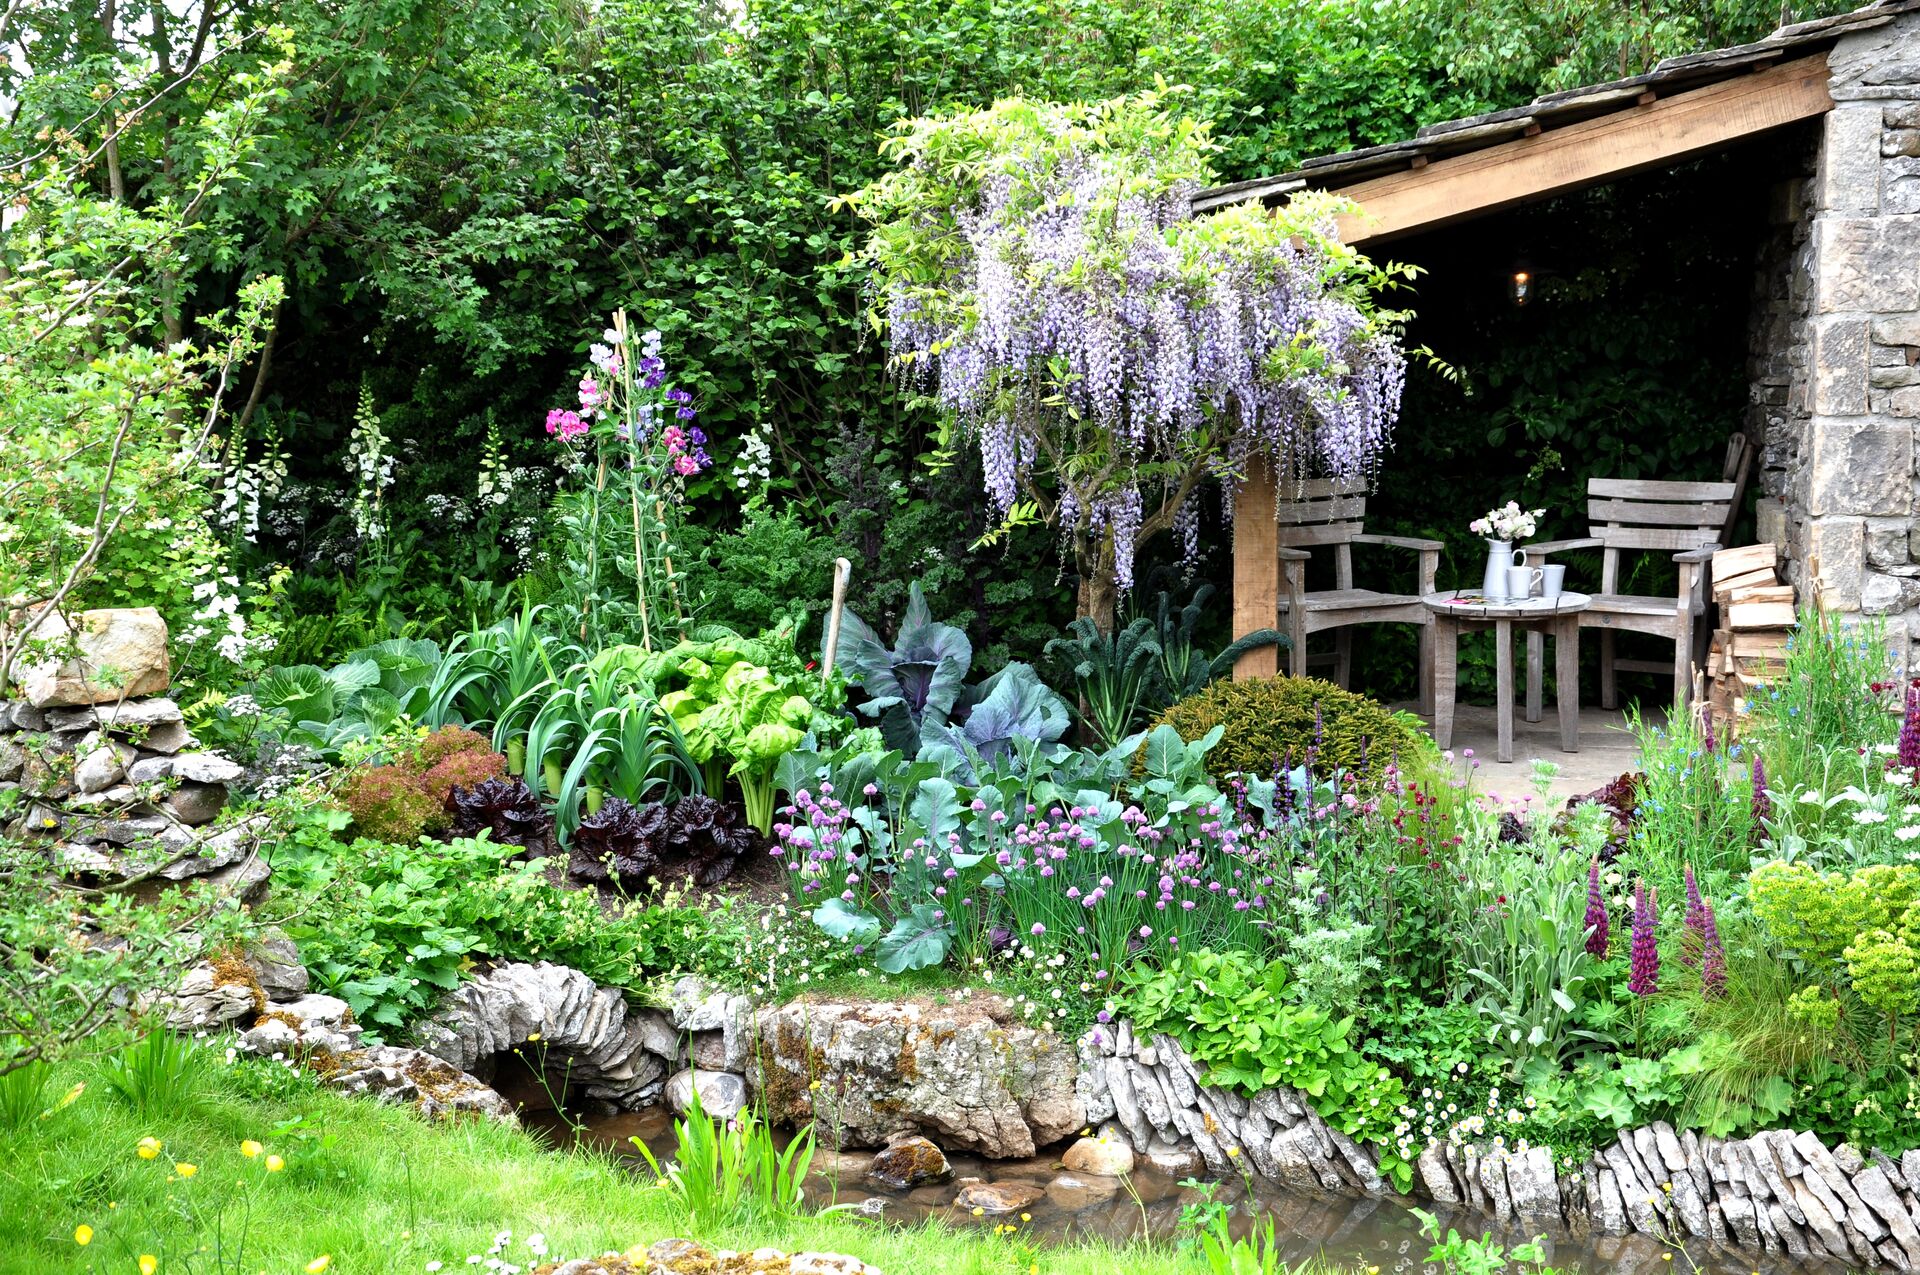 Gardening enthusiasts, here’s why visiting the Chelsea Flower Show is an absolute must